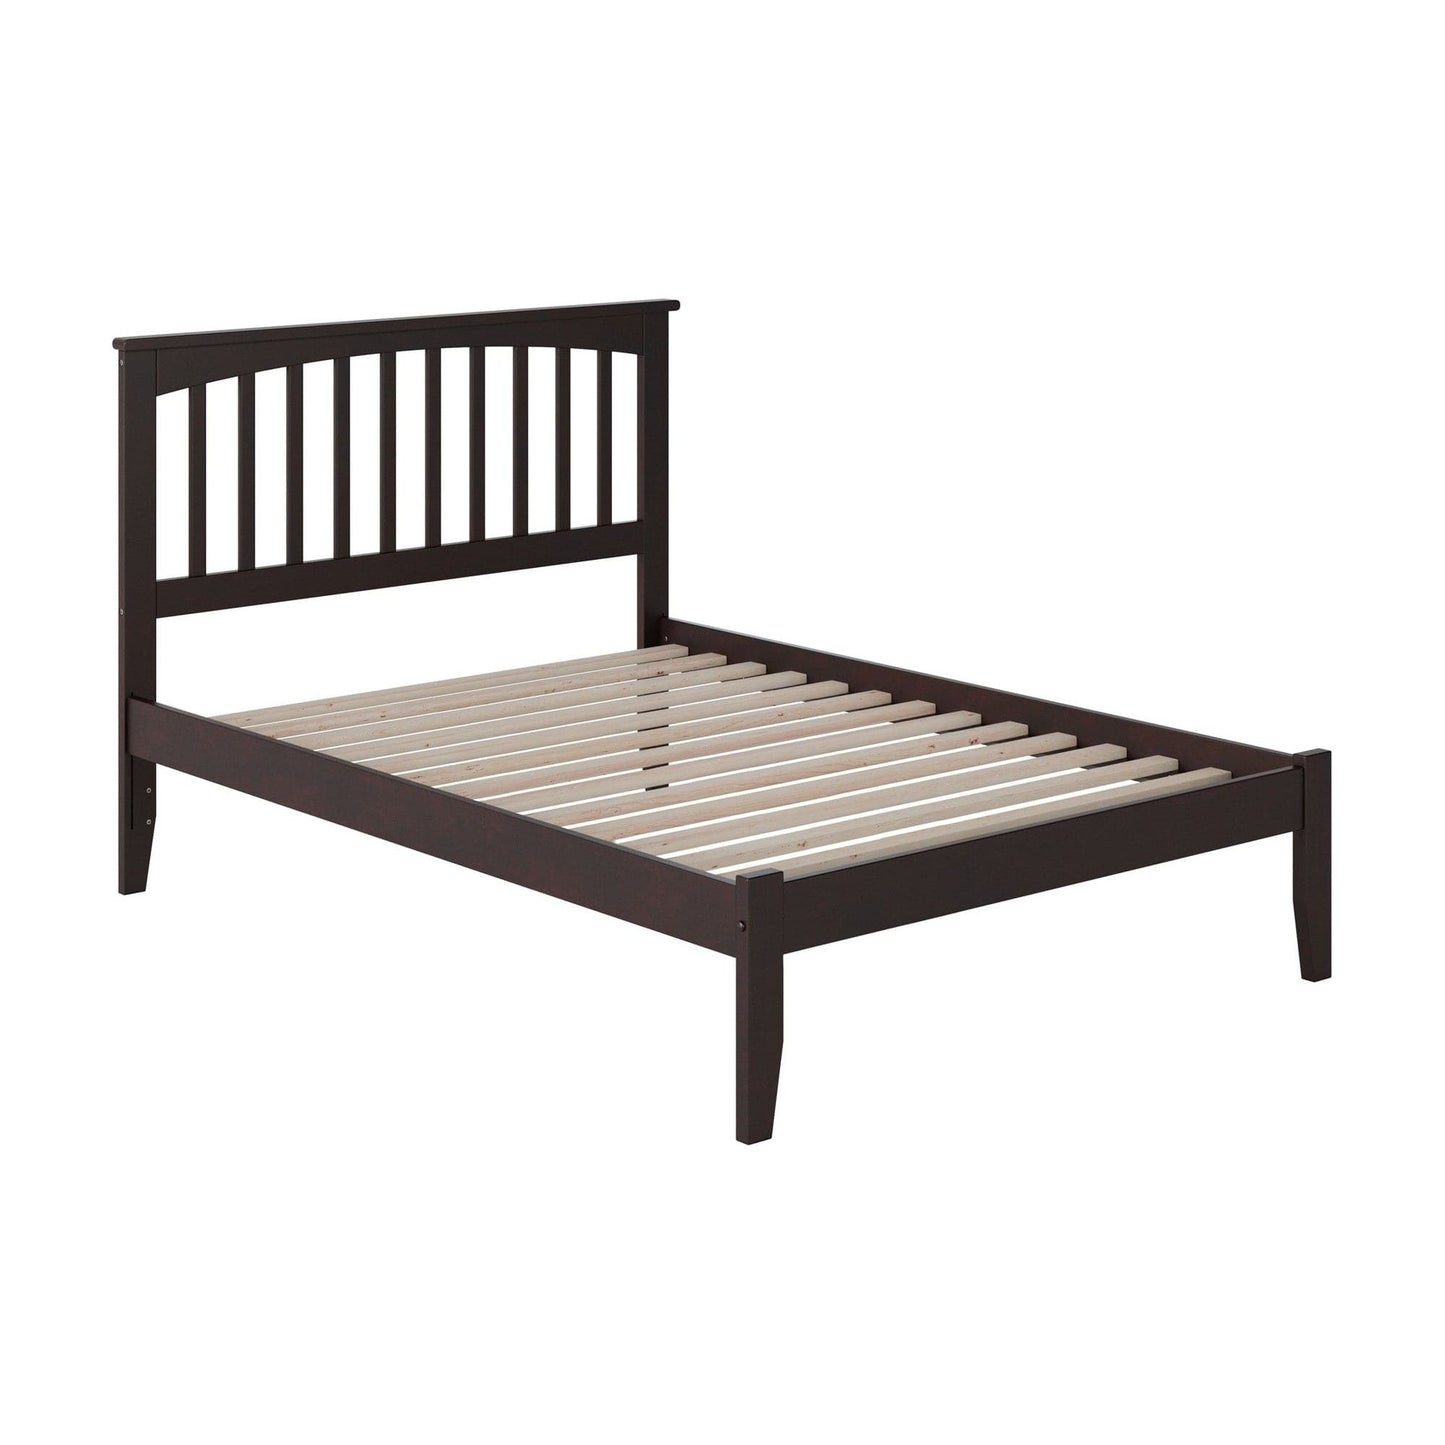 AFI Furnishings Mission Full Platform Bed with Open Foot Board